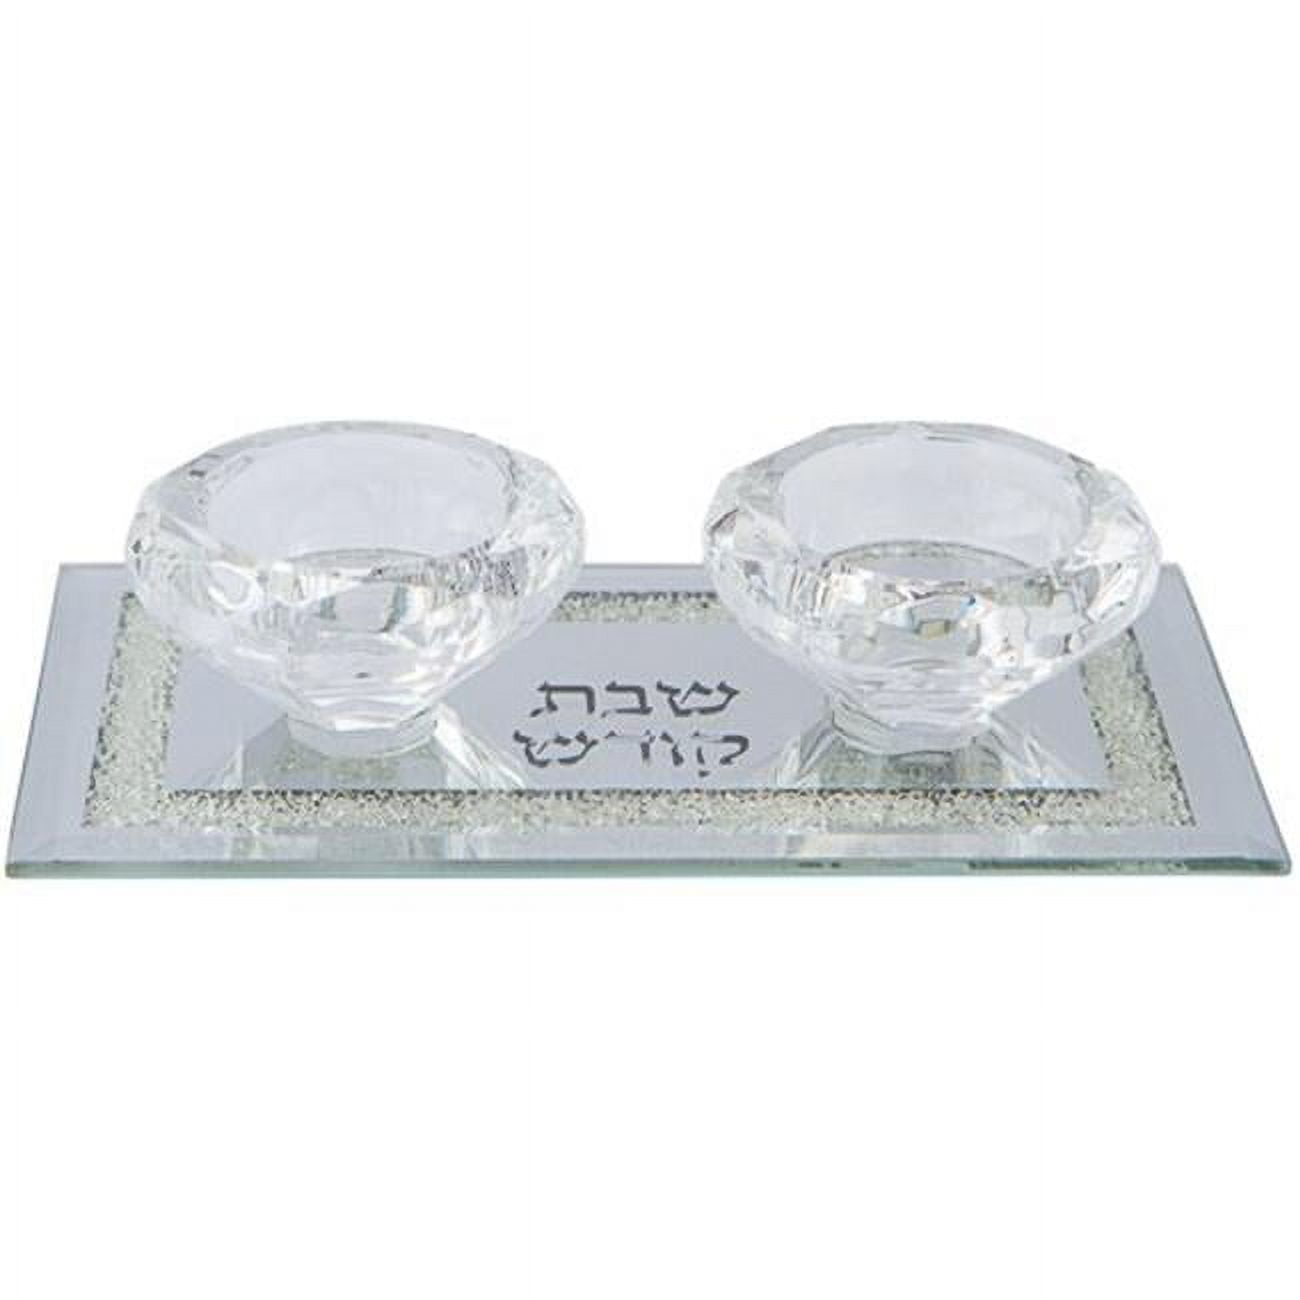 Picture of A&M Judaica 51395 5 x 17 x 9 cm Crystal Candlesticks with Decorative Stones